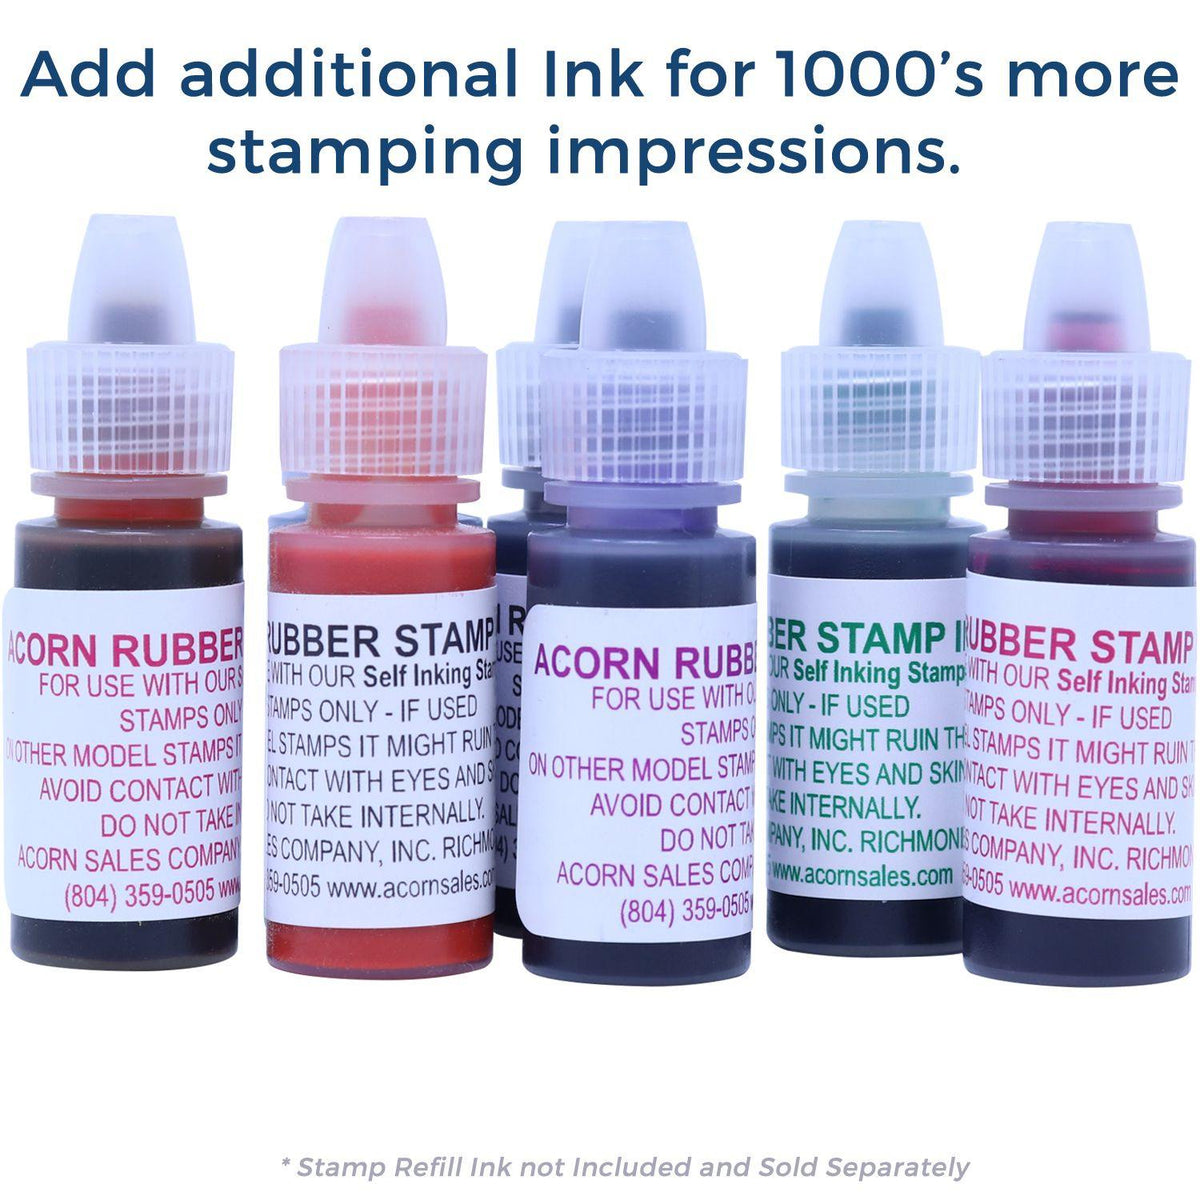 Slim Pre-Inked 1st 2nd Notice Returned Stamp - Engineer Seal Stamps - Brand_Slim, Impression Size_Small, Stamp Type_Pre-Inked Stamp, Type of Use_Mailing, Type of Use_Office